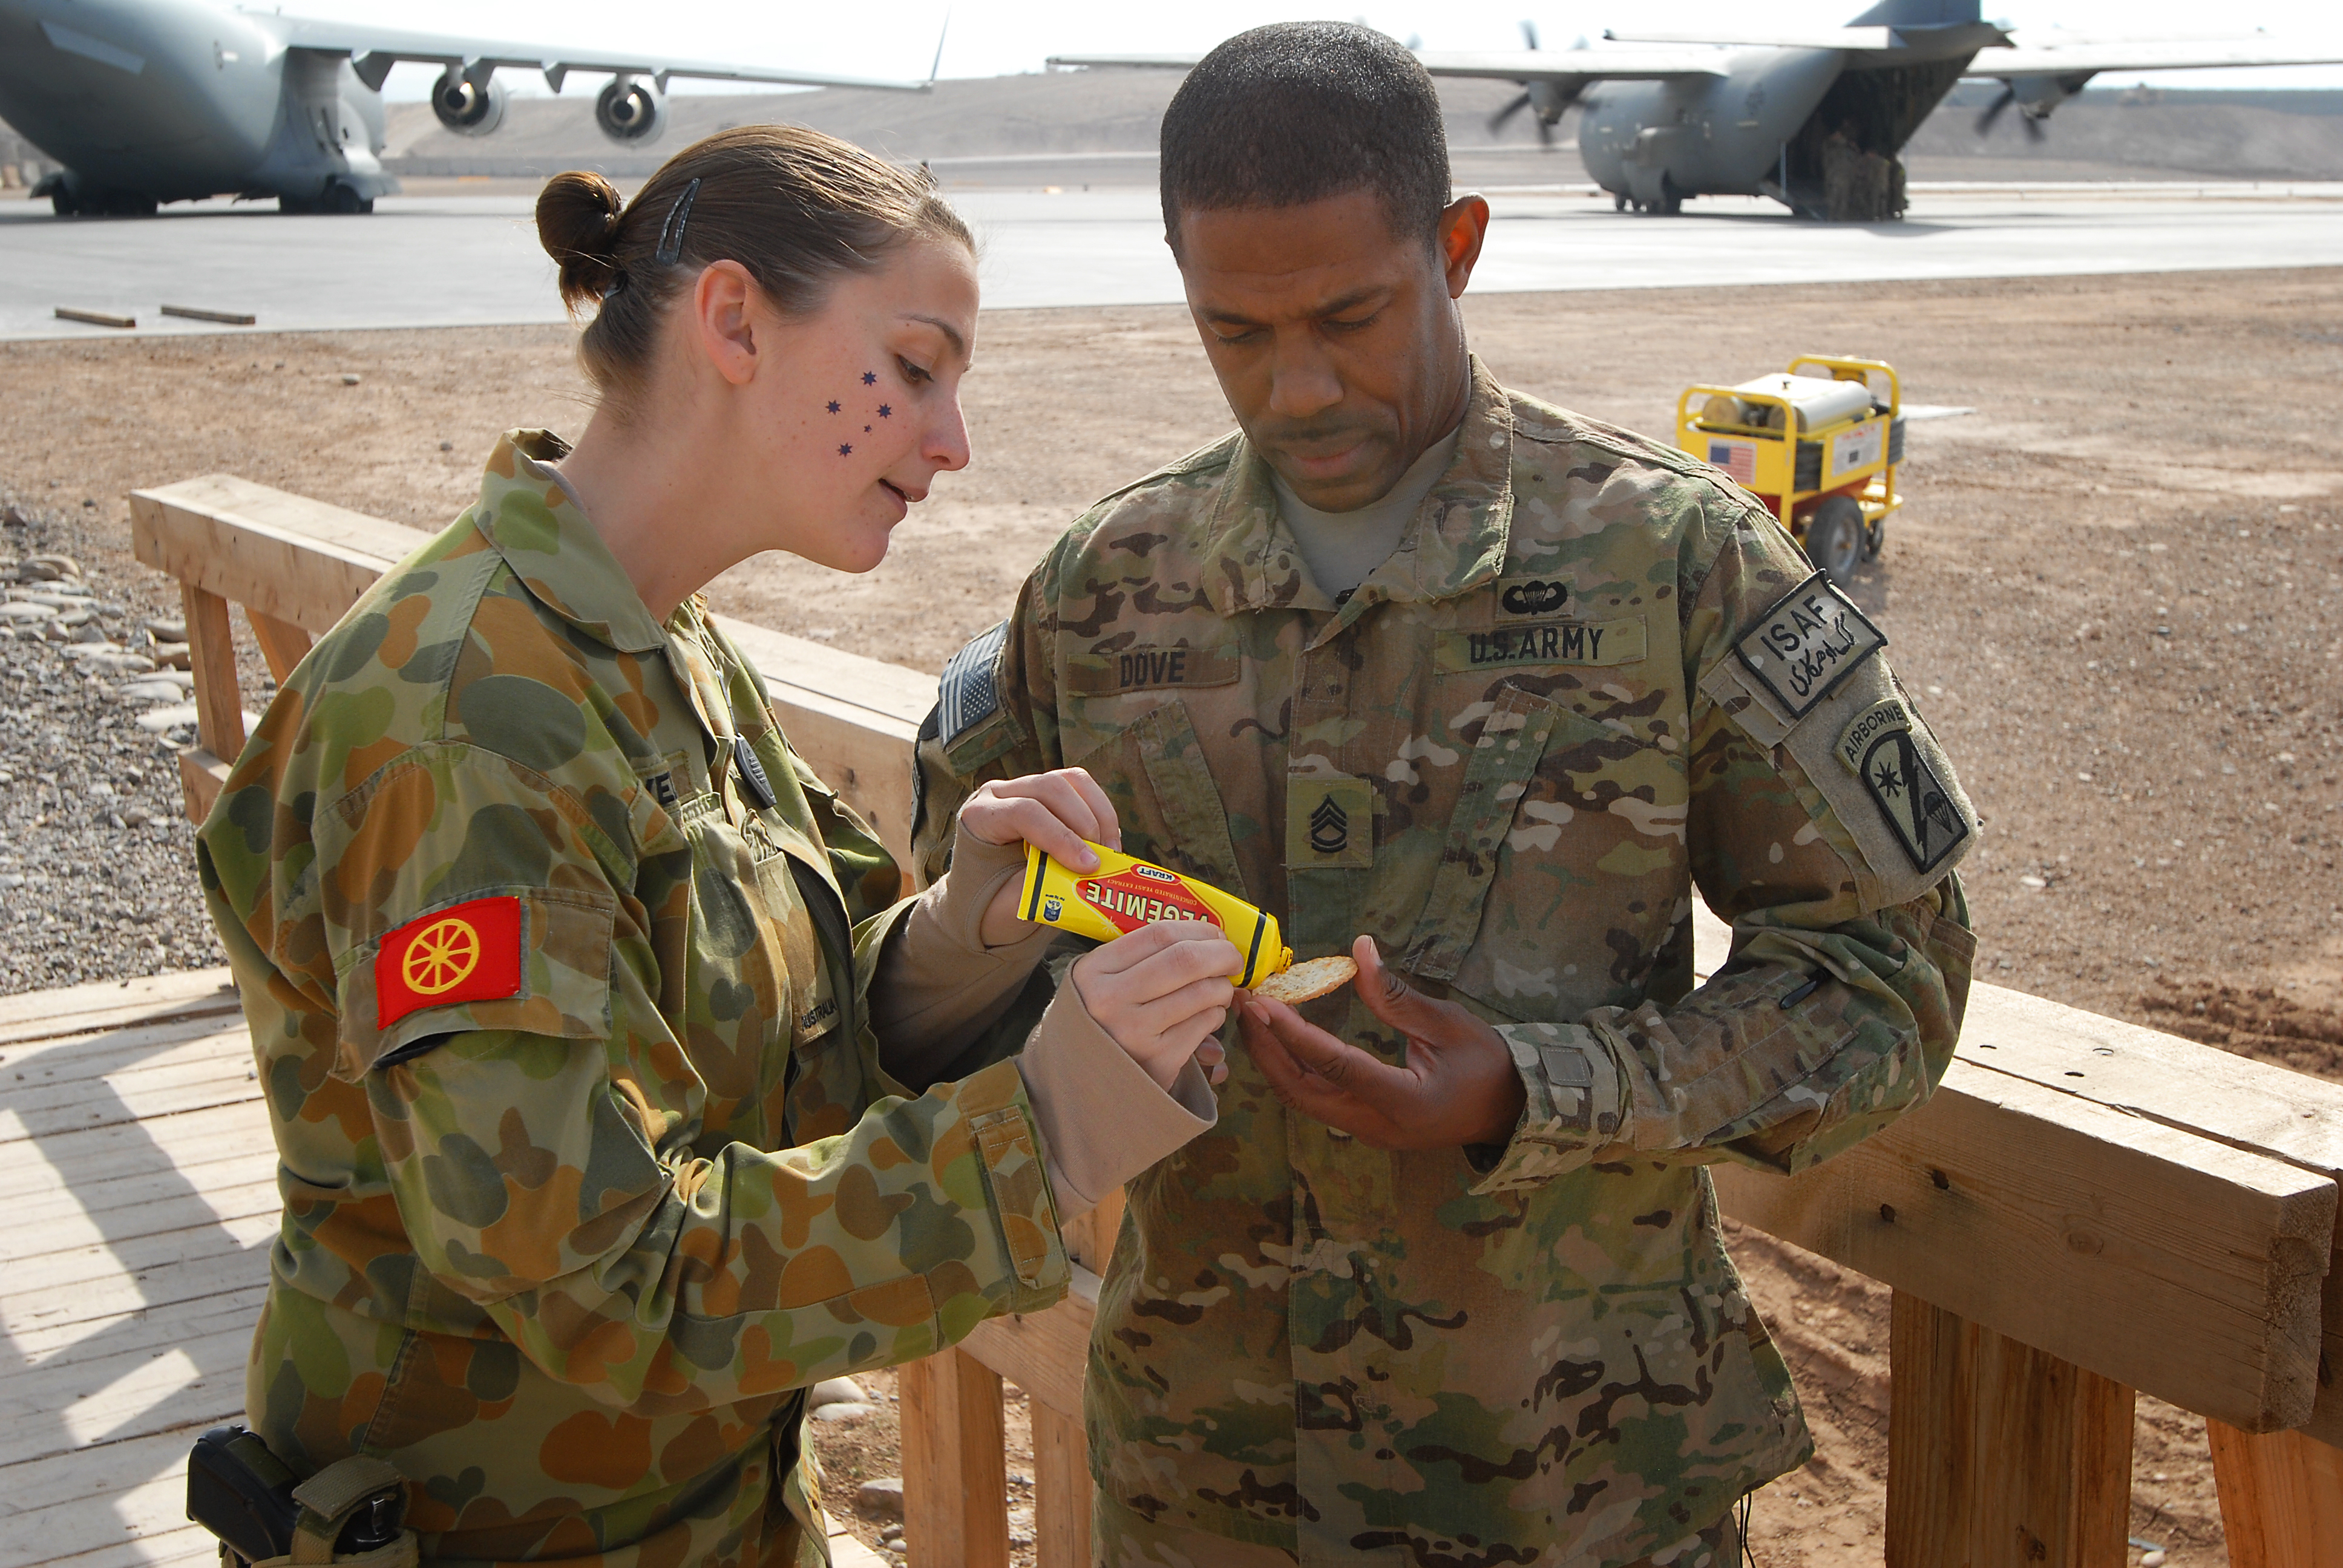 Australian Army Pvt. Tara Pavel explains the best way to eat Vegemite to Sgt. 1st Class Patrick Dove, 329th Transportation Detachment, 49th Joint Movement Control Battalion, at Multi National Base Tarin Kot, Afghanistan, on Australia Day, Jan. 26, 2013. Vegemite is an Australian food spread for sandwiches, toast, and biscuits, but for Americans is an acquired taste.